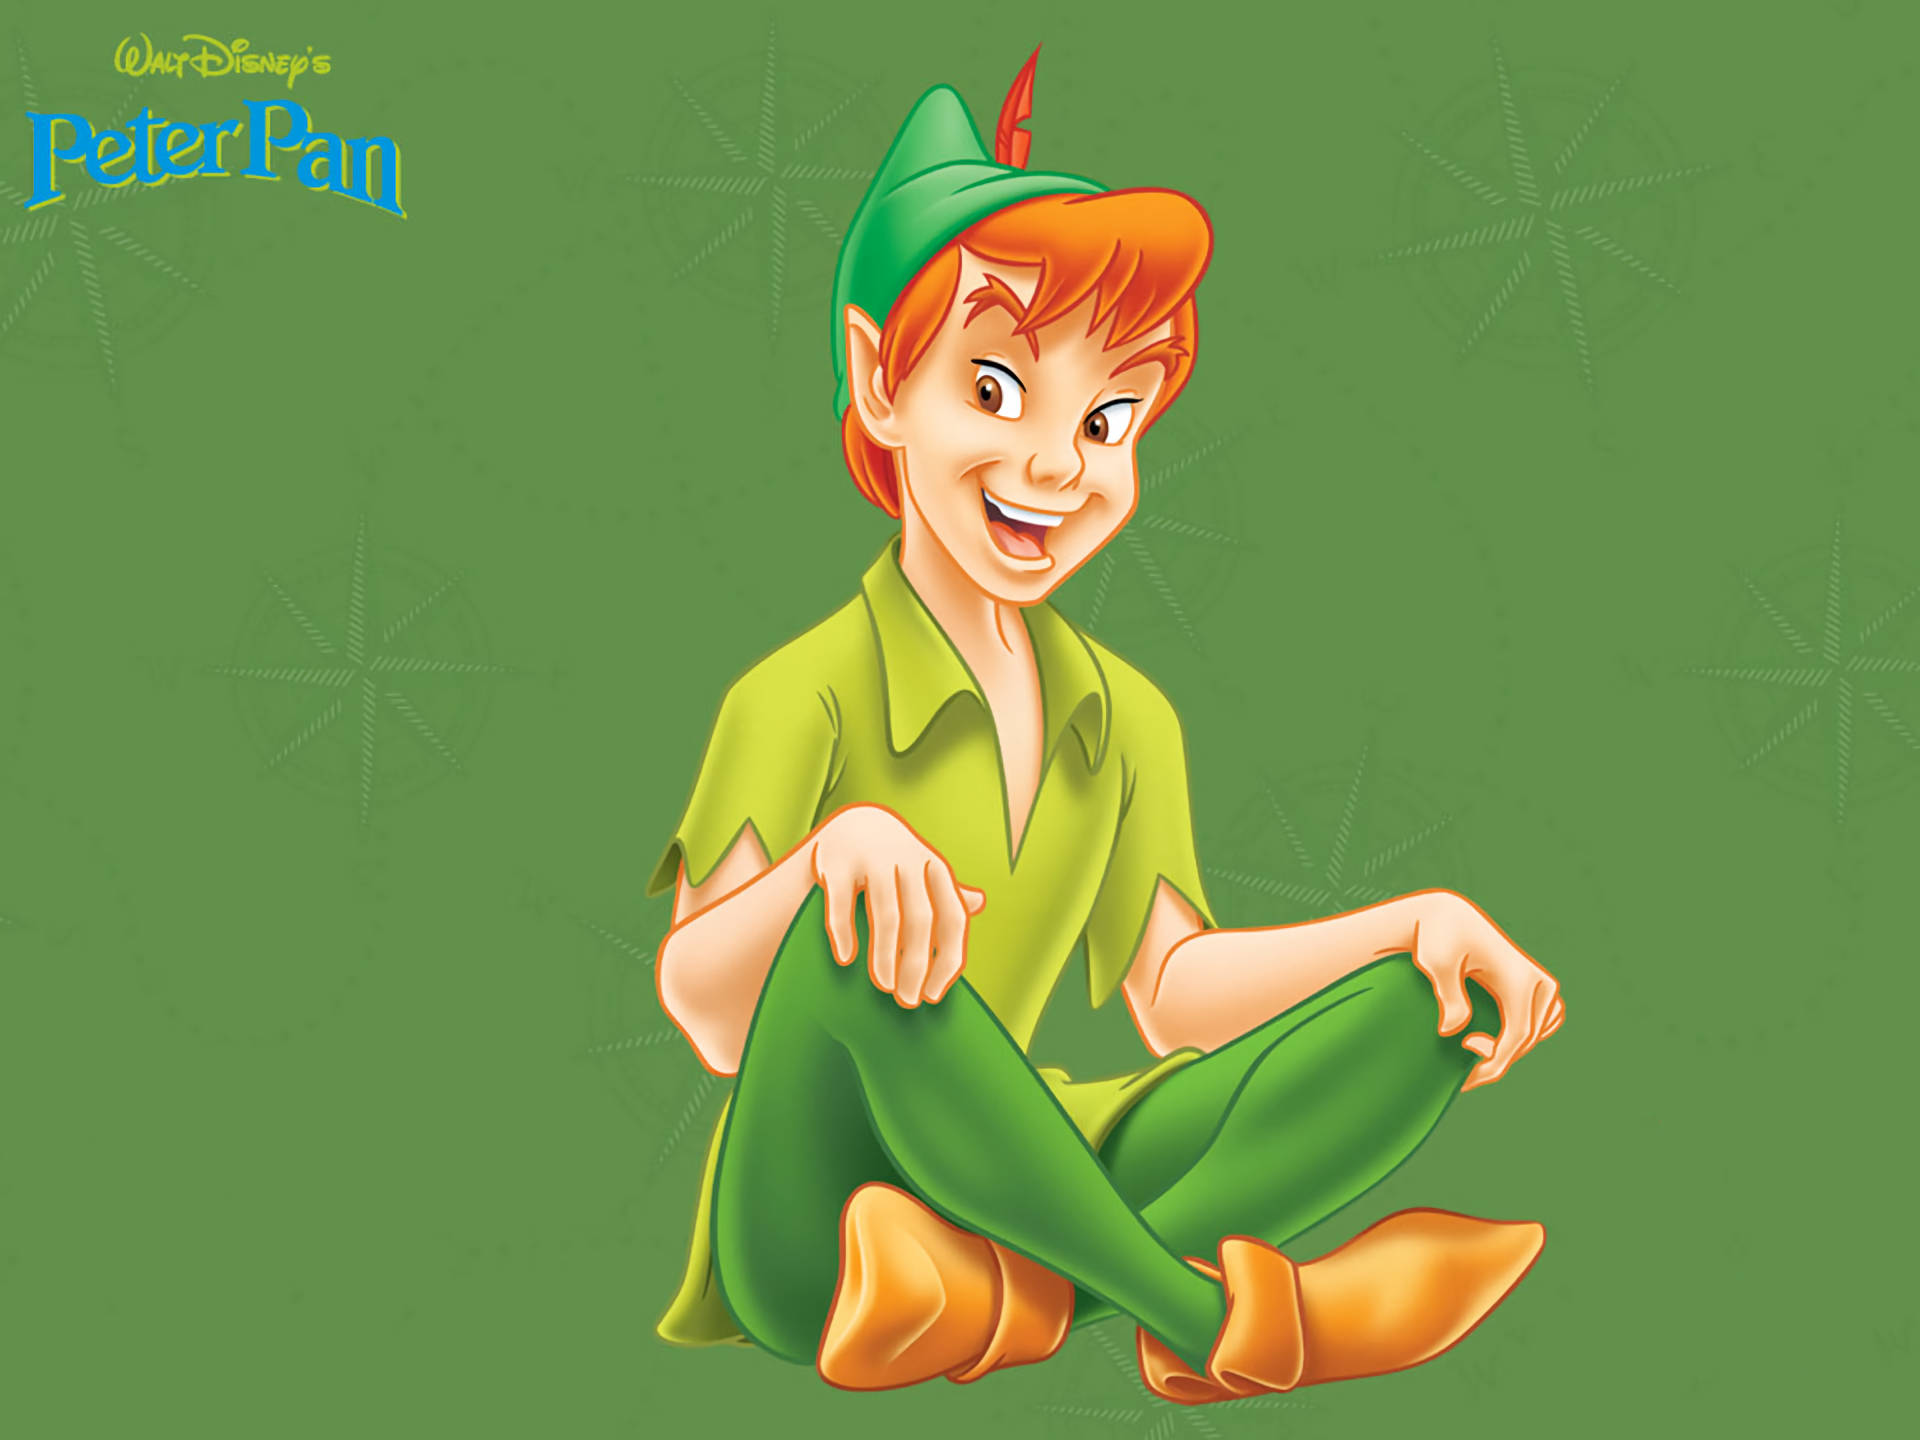 1920X1440 Peter Pan Wallpaper and Background